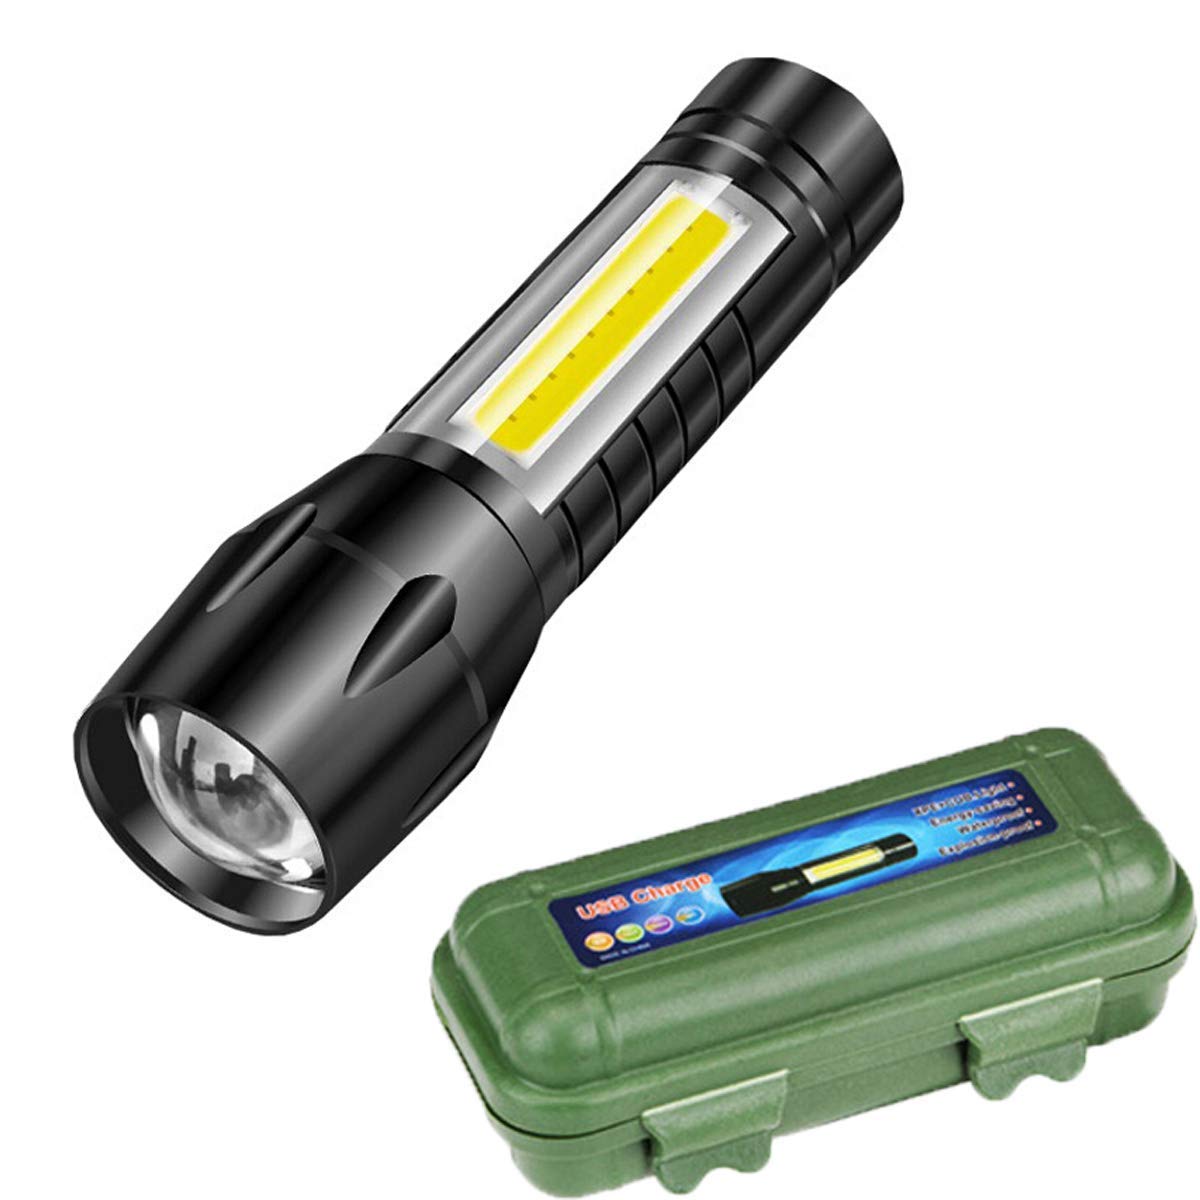 Clarity Metal Flashlight Rechargeable Torch – Black